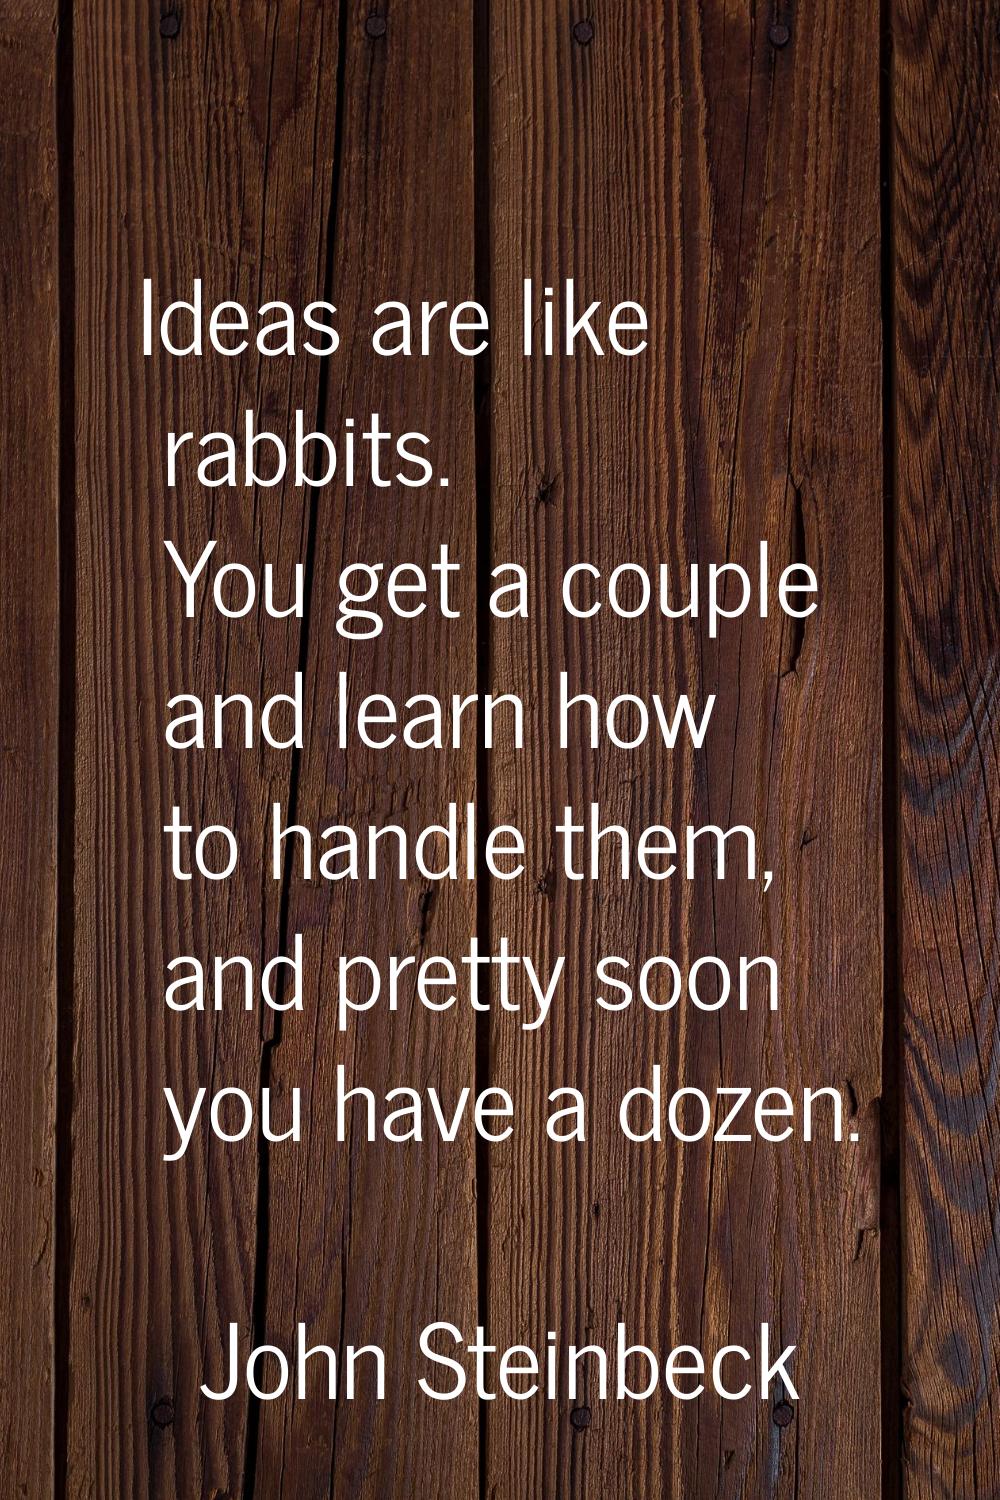 Ideas are like rabbits. You get a couple and learn how to handle them, and pretty soon you have a d